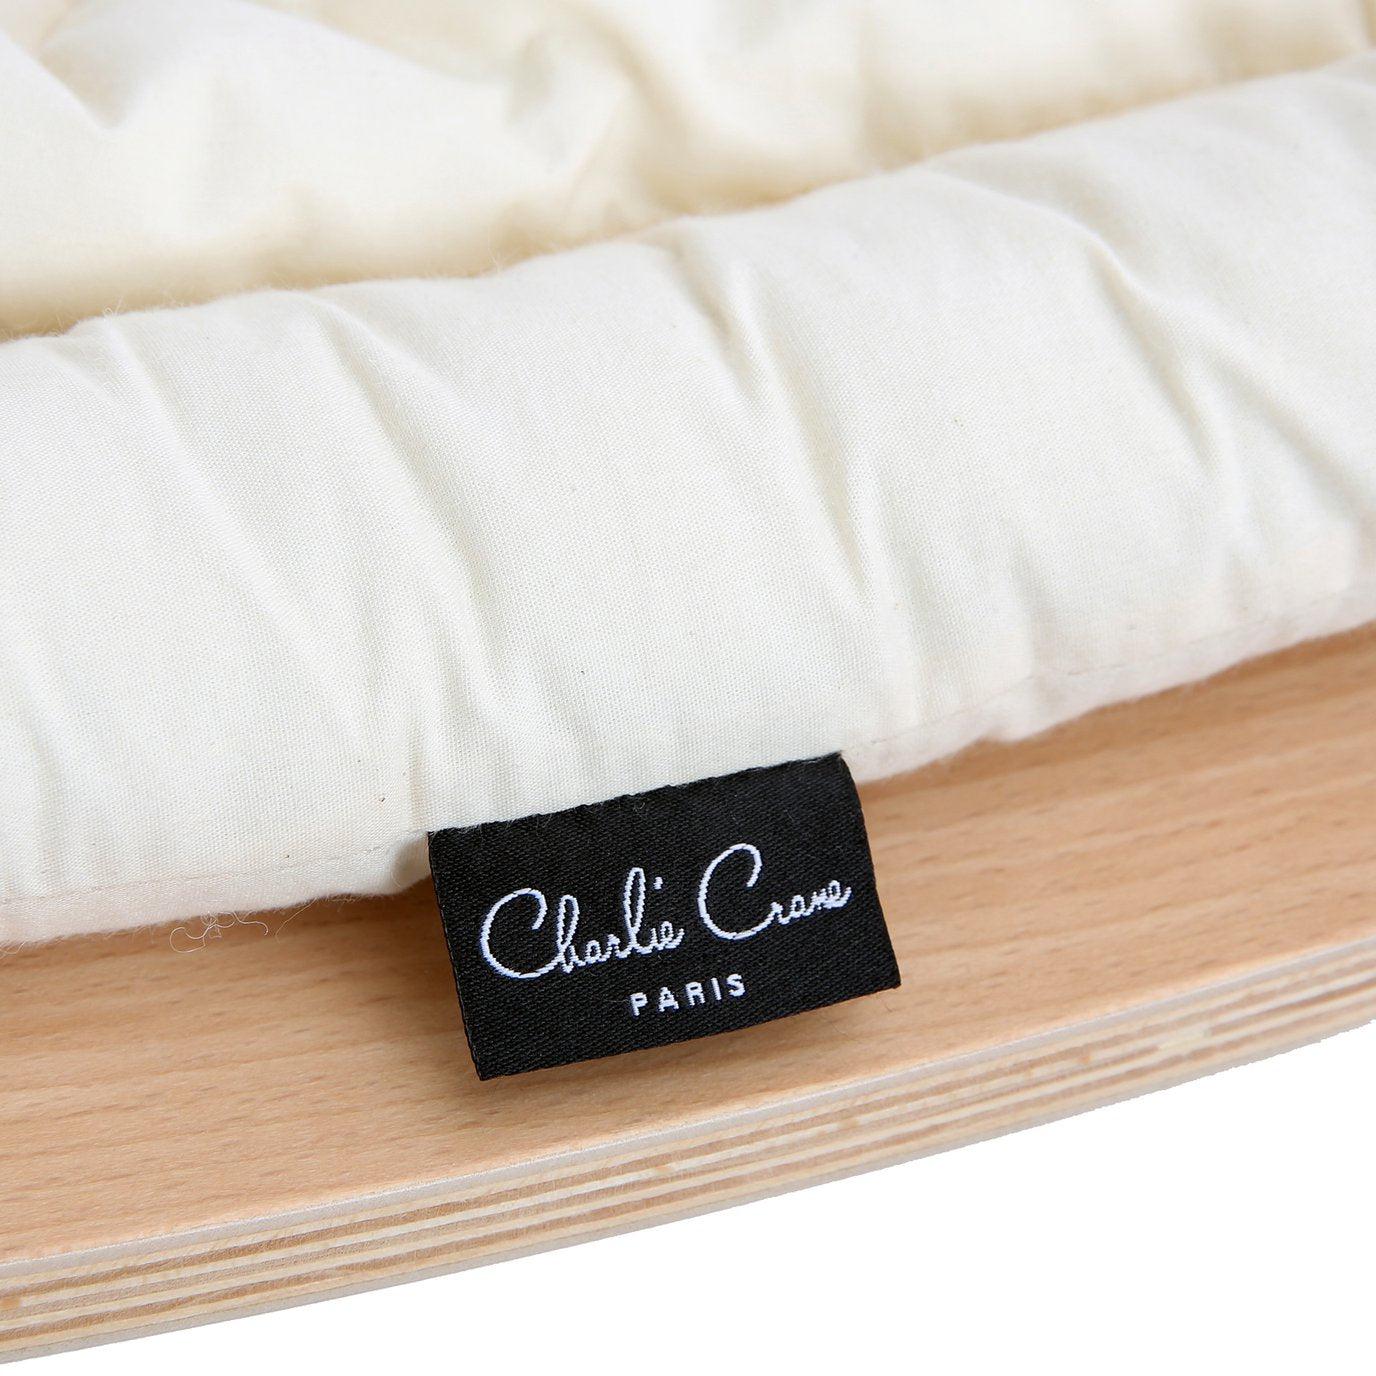 A Levo Rocker with a label on an Organic White pillow by Charlie Crane.